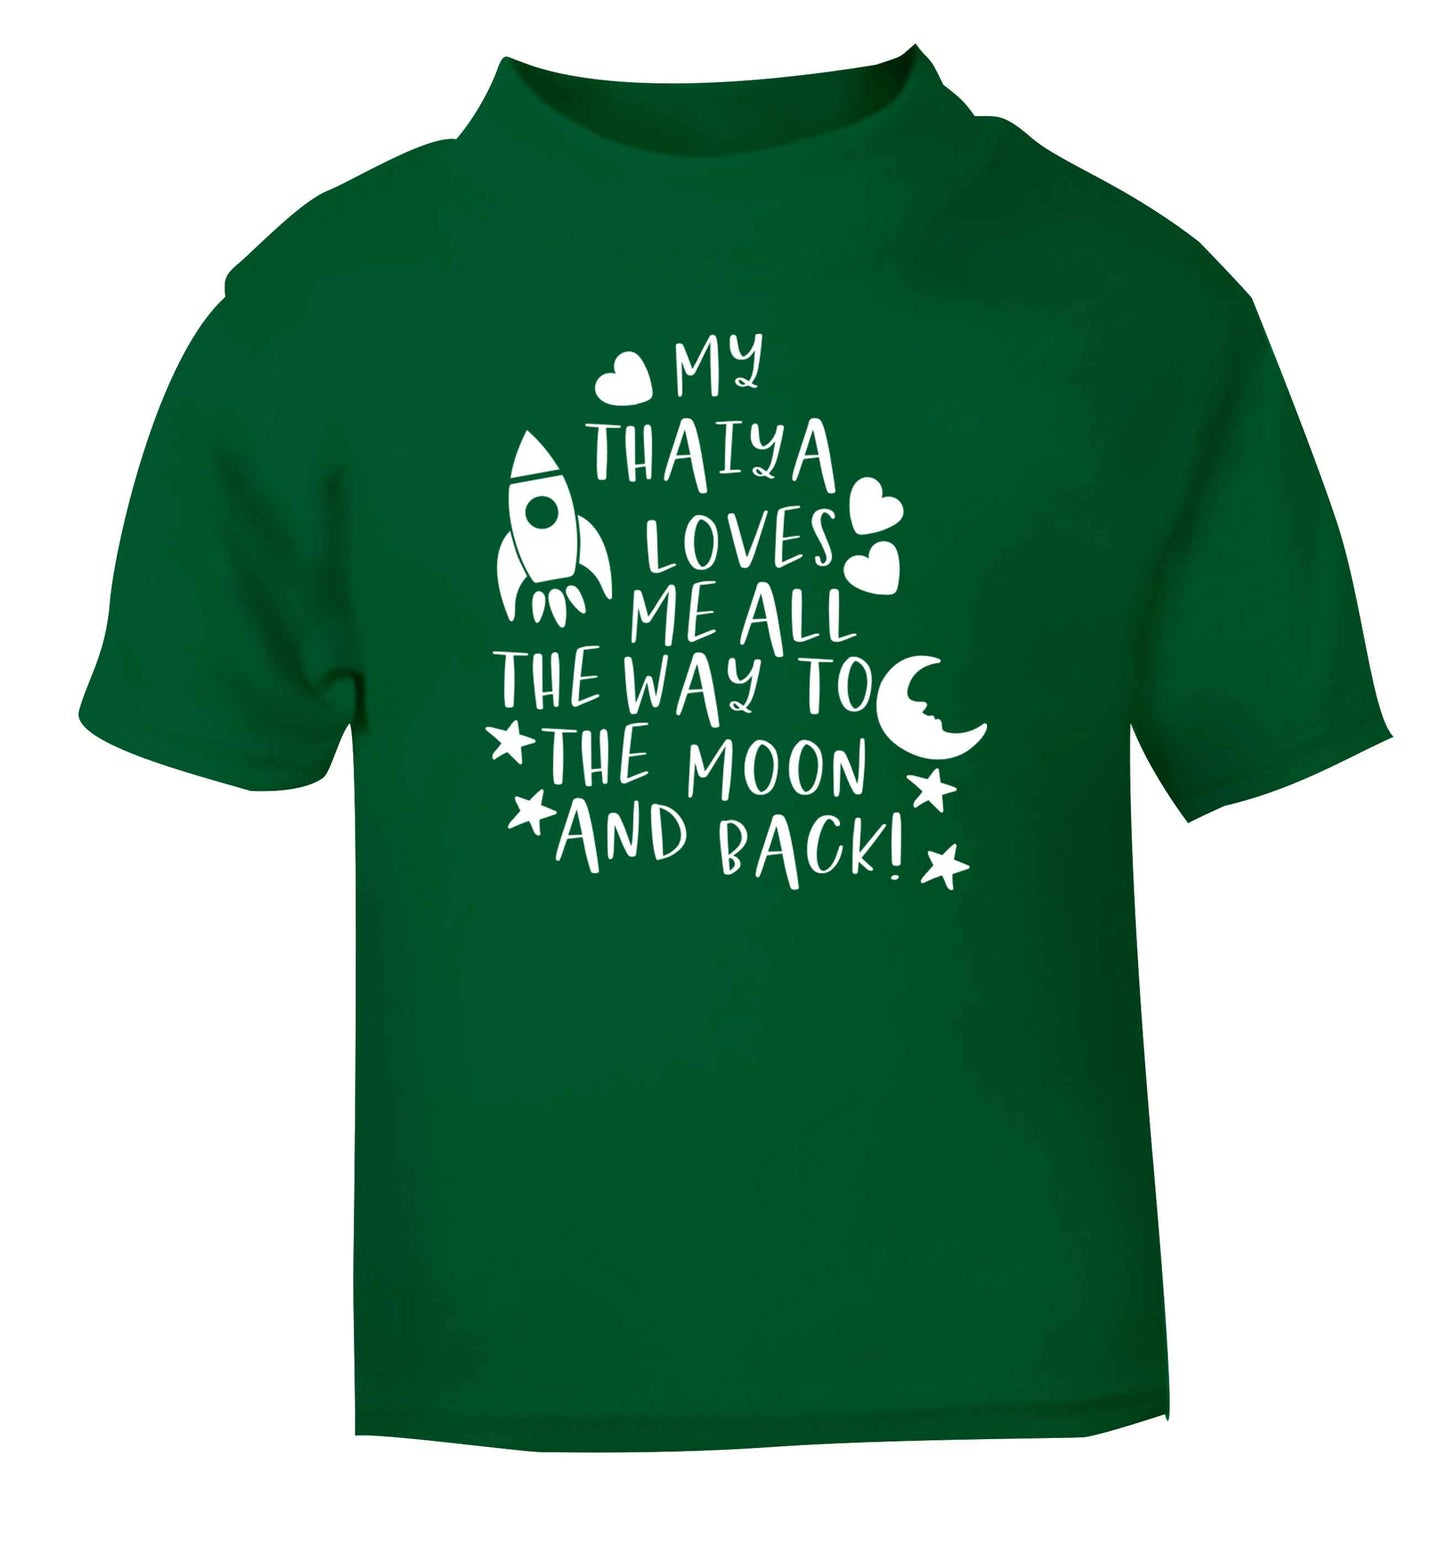 My thaiya loves me all the way to the moon and back green Baby Toddler Tshirt 2 Years